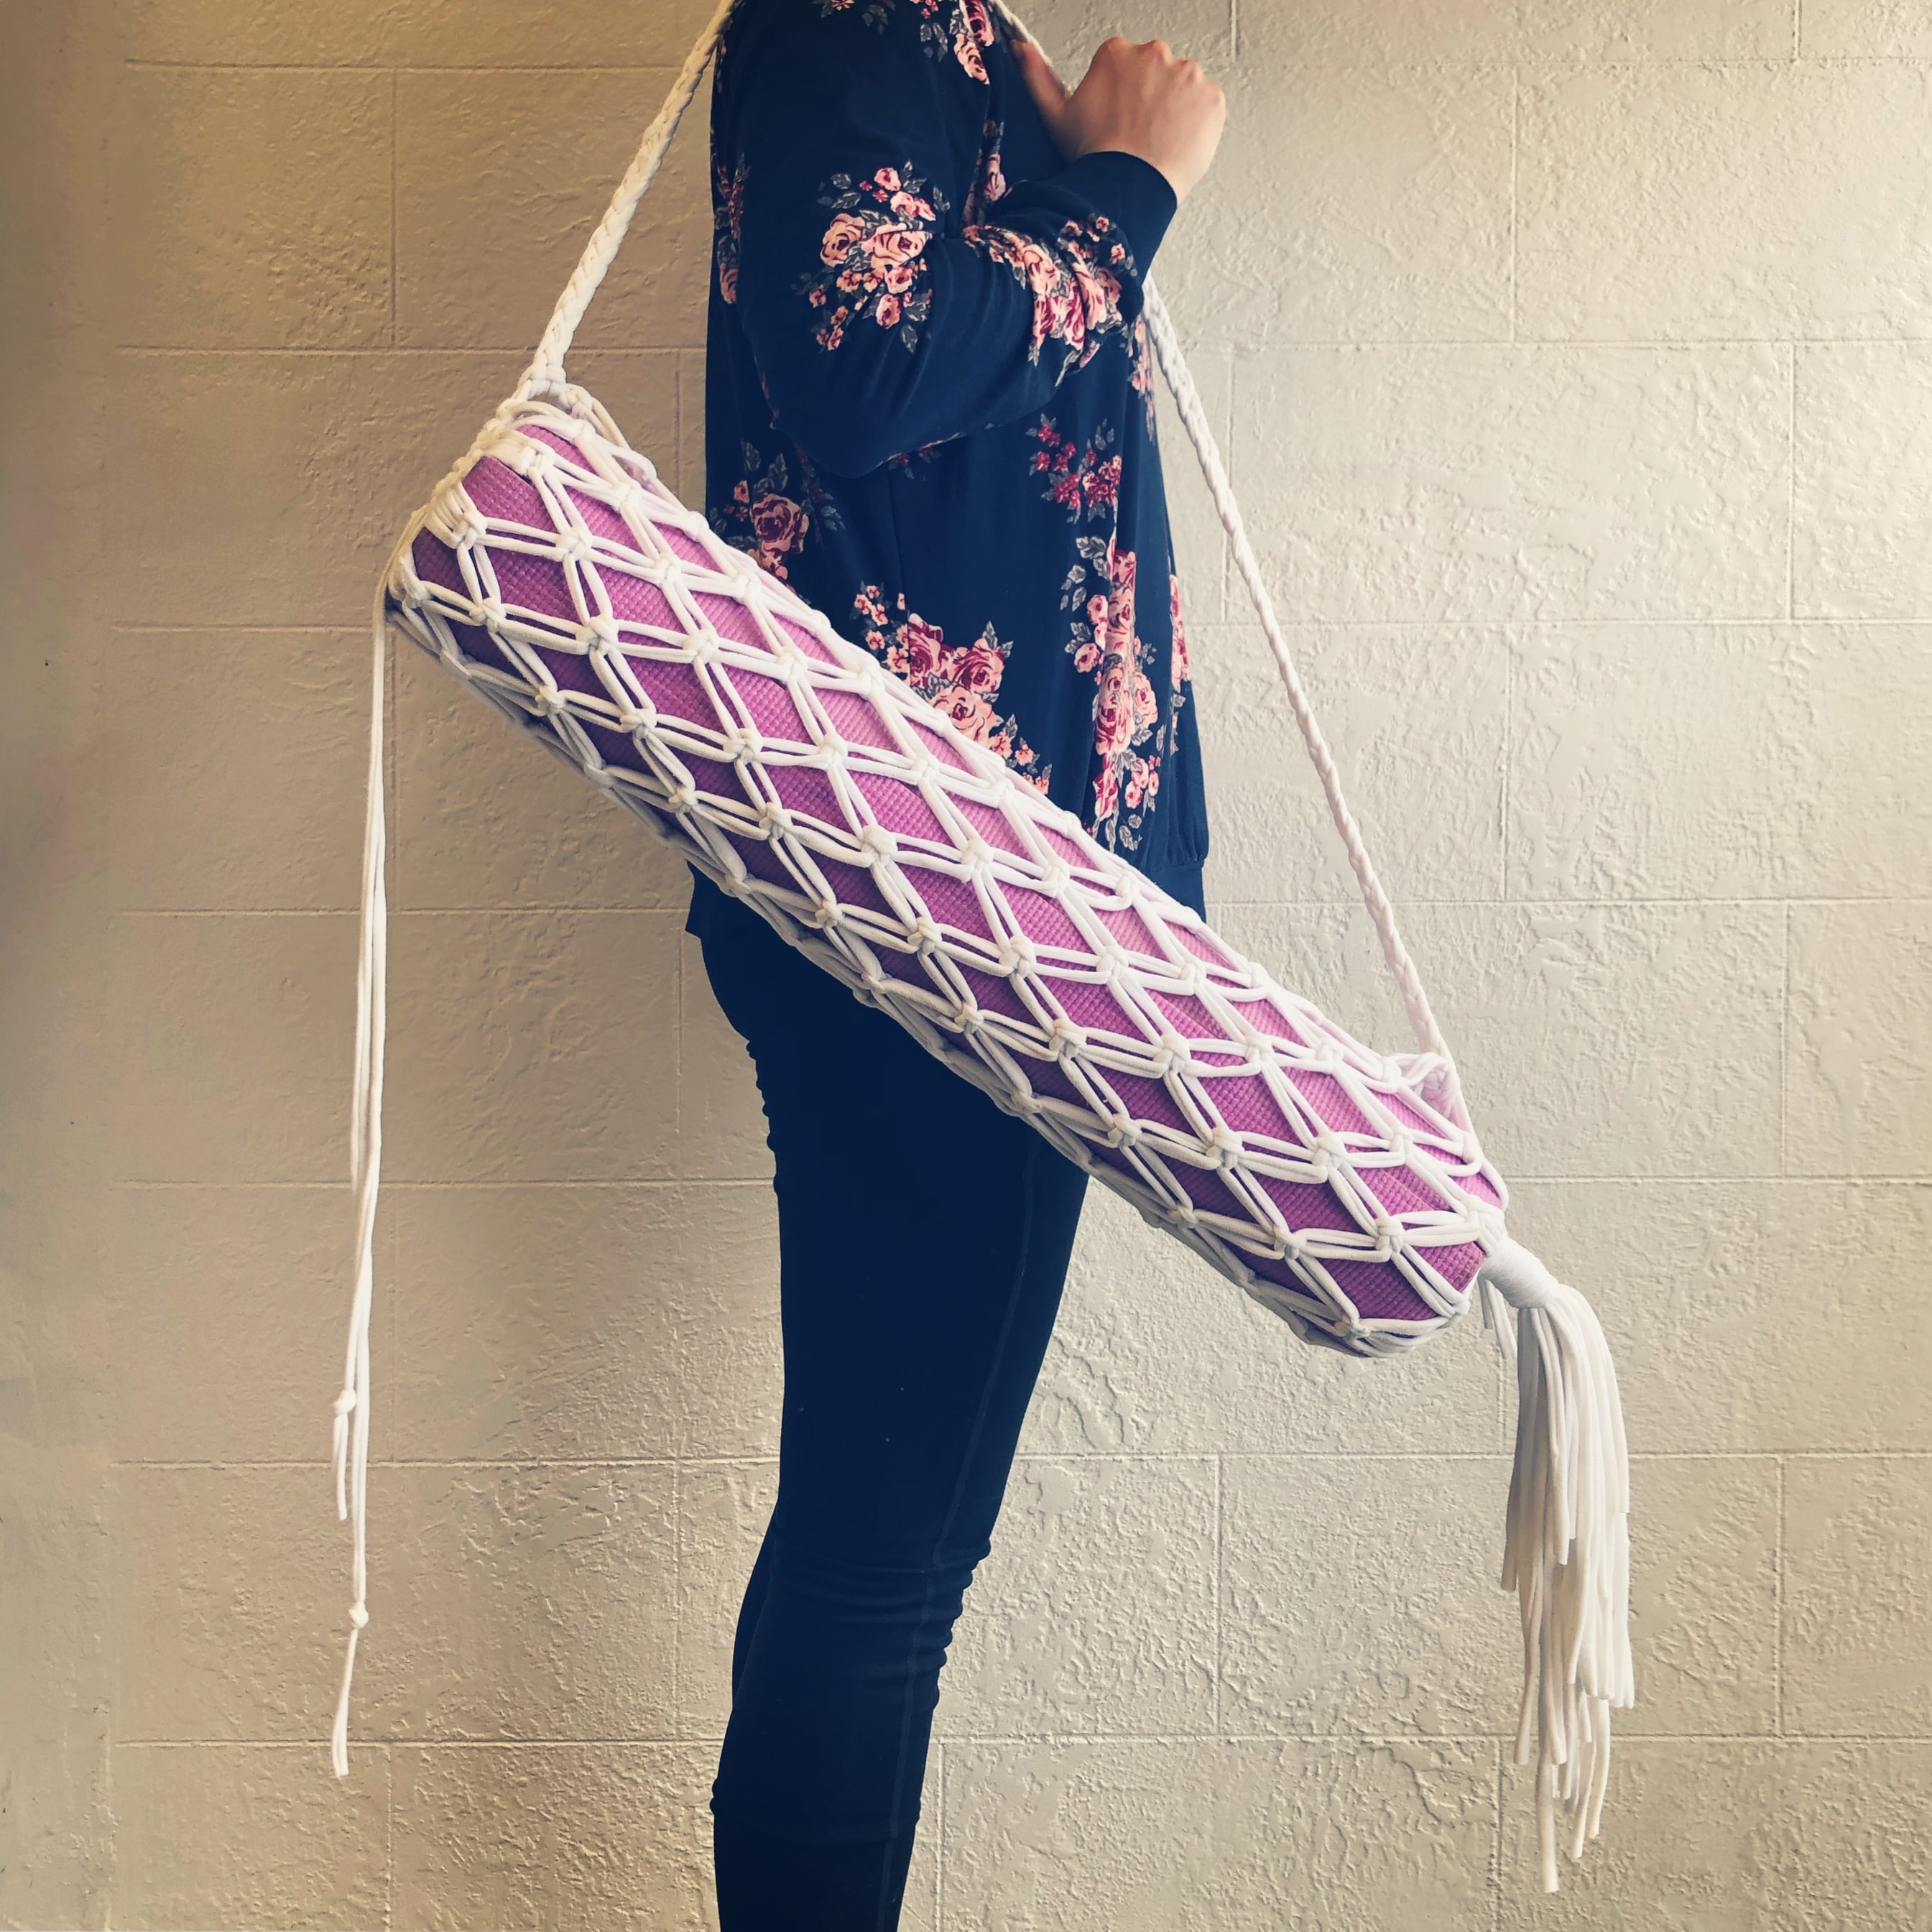 greathomemade - 🌿 MACRAME YOGA MAT BAG / YOGA TOTE 🌿 handmade modern  fibre art and bohemian macrame statement pieces designed to fill your home  with warmth, texture, whimsy, and dimension. CREATION